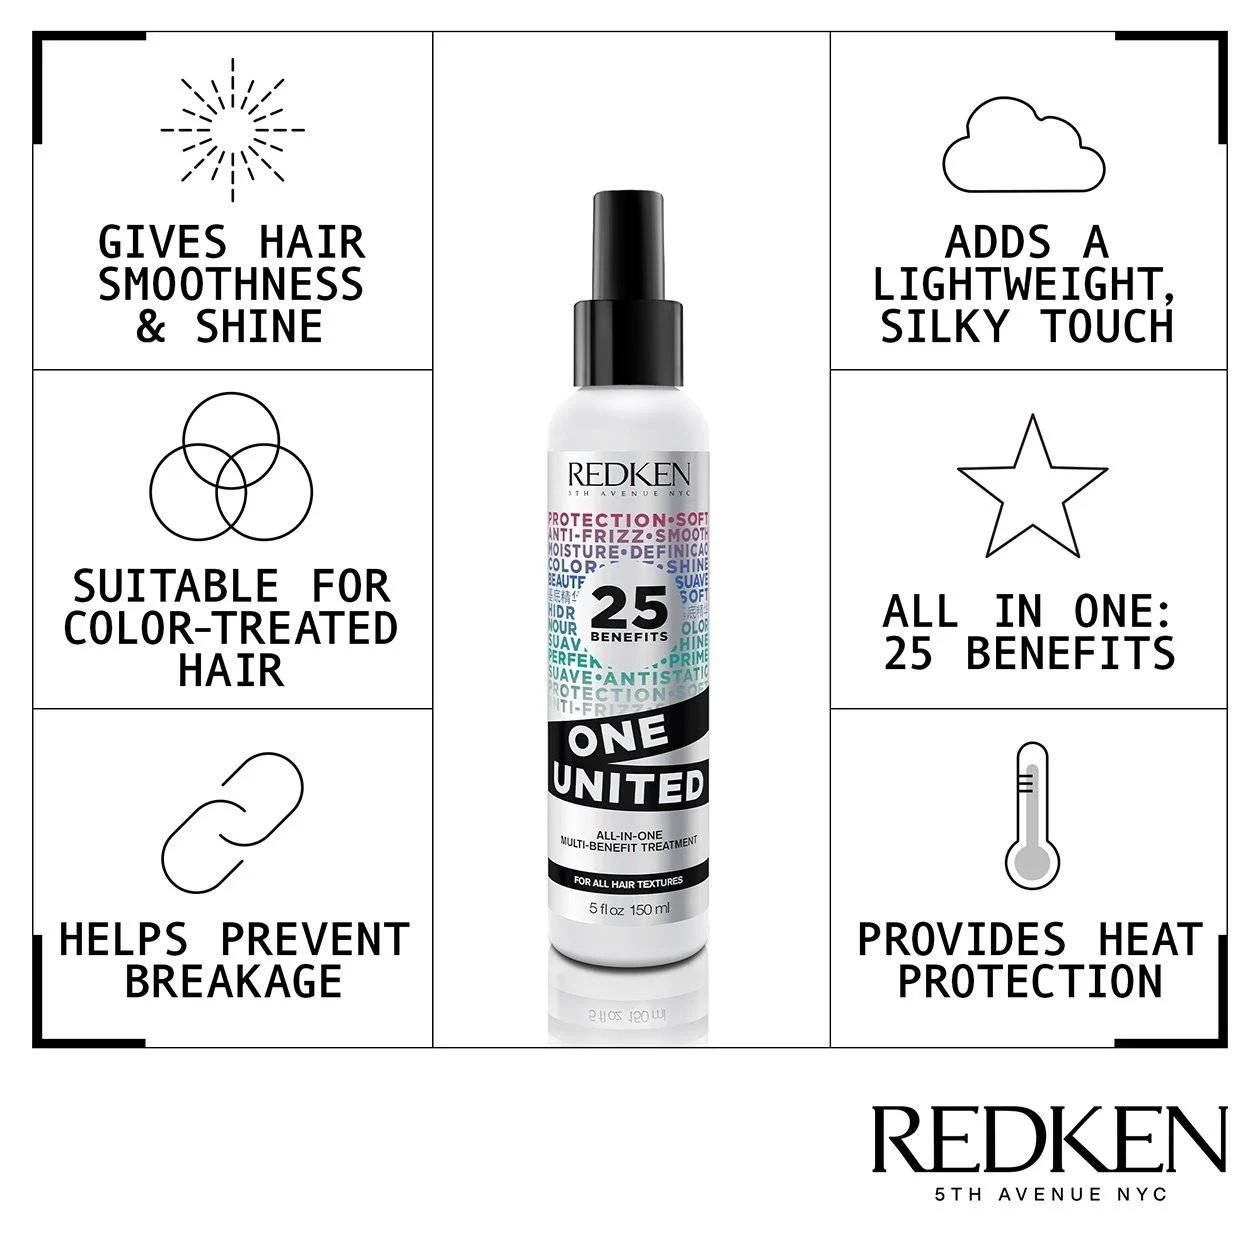 redken-2020-one-united-product-benefit-infographic-template